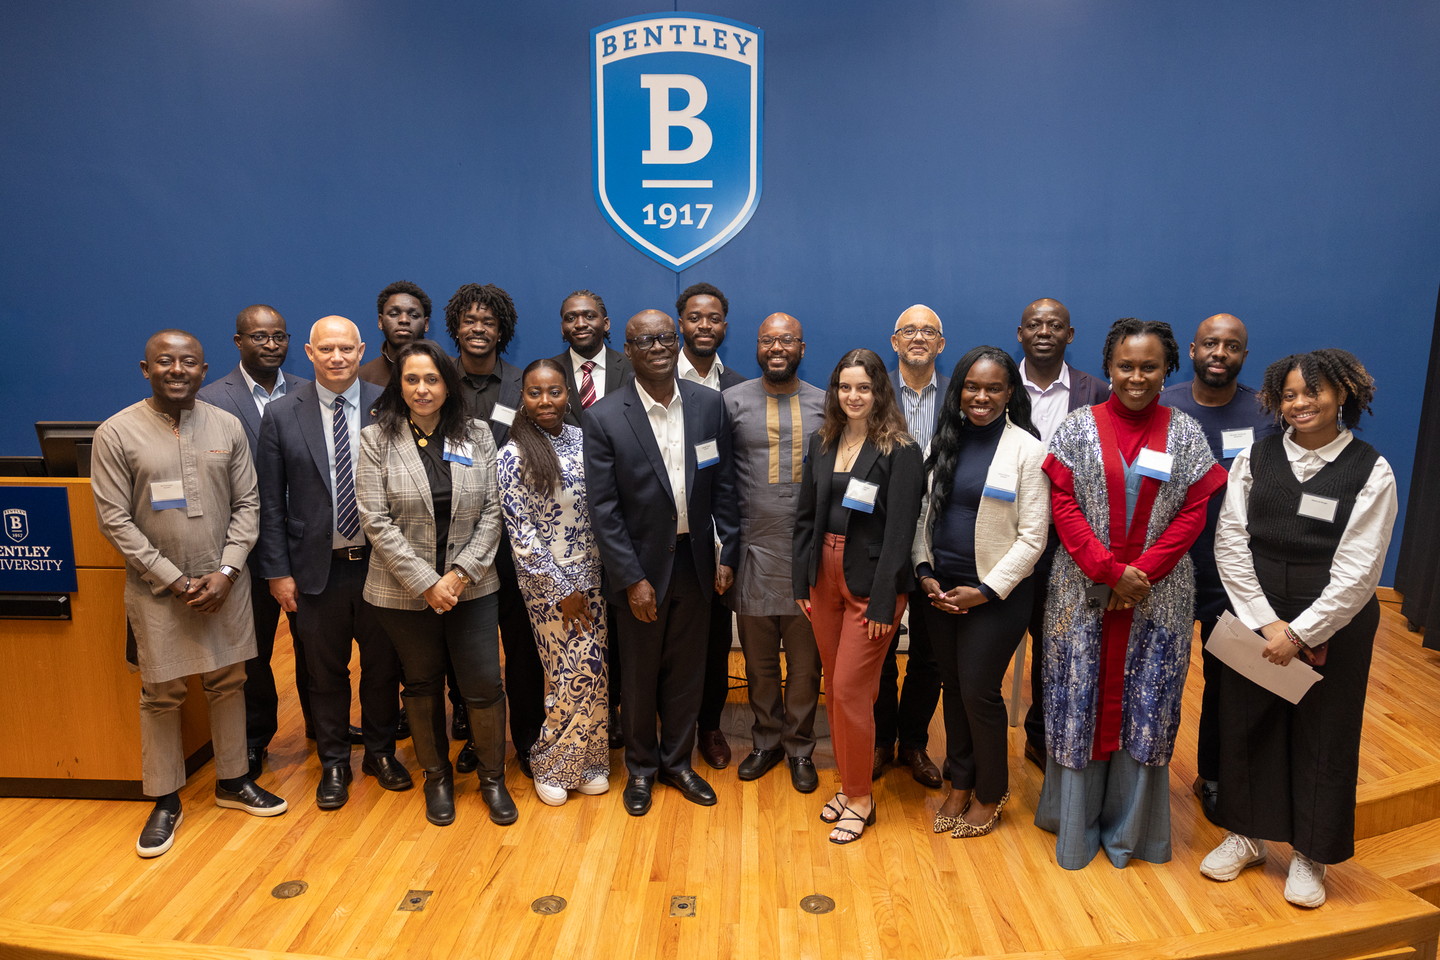 Bentley’s African Business Conference: A Unifying Force for Change in Africa